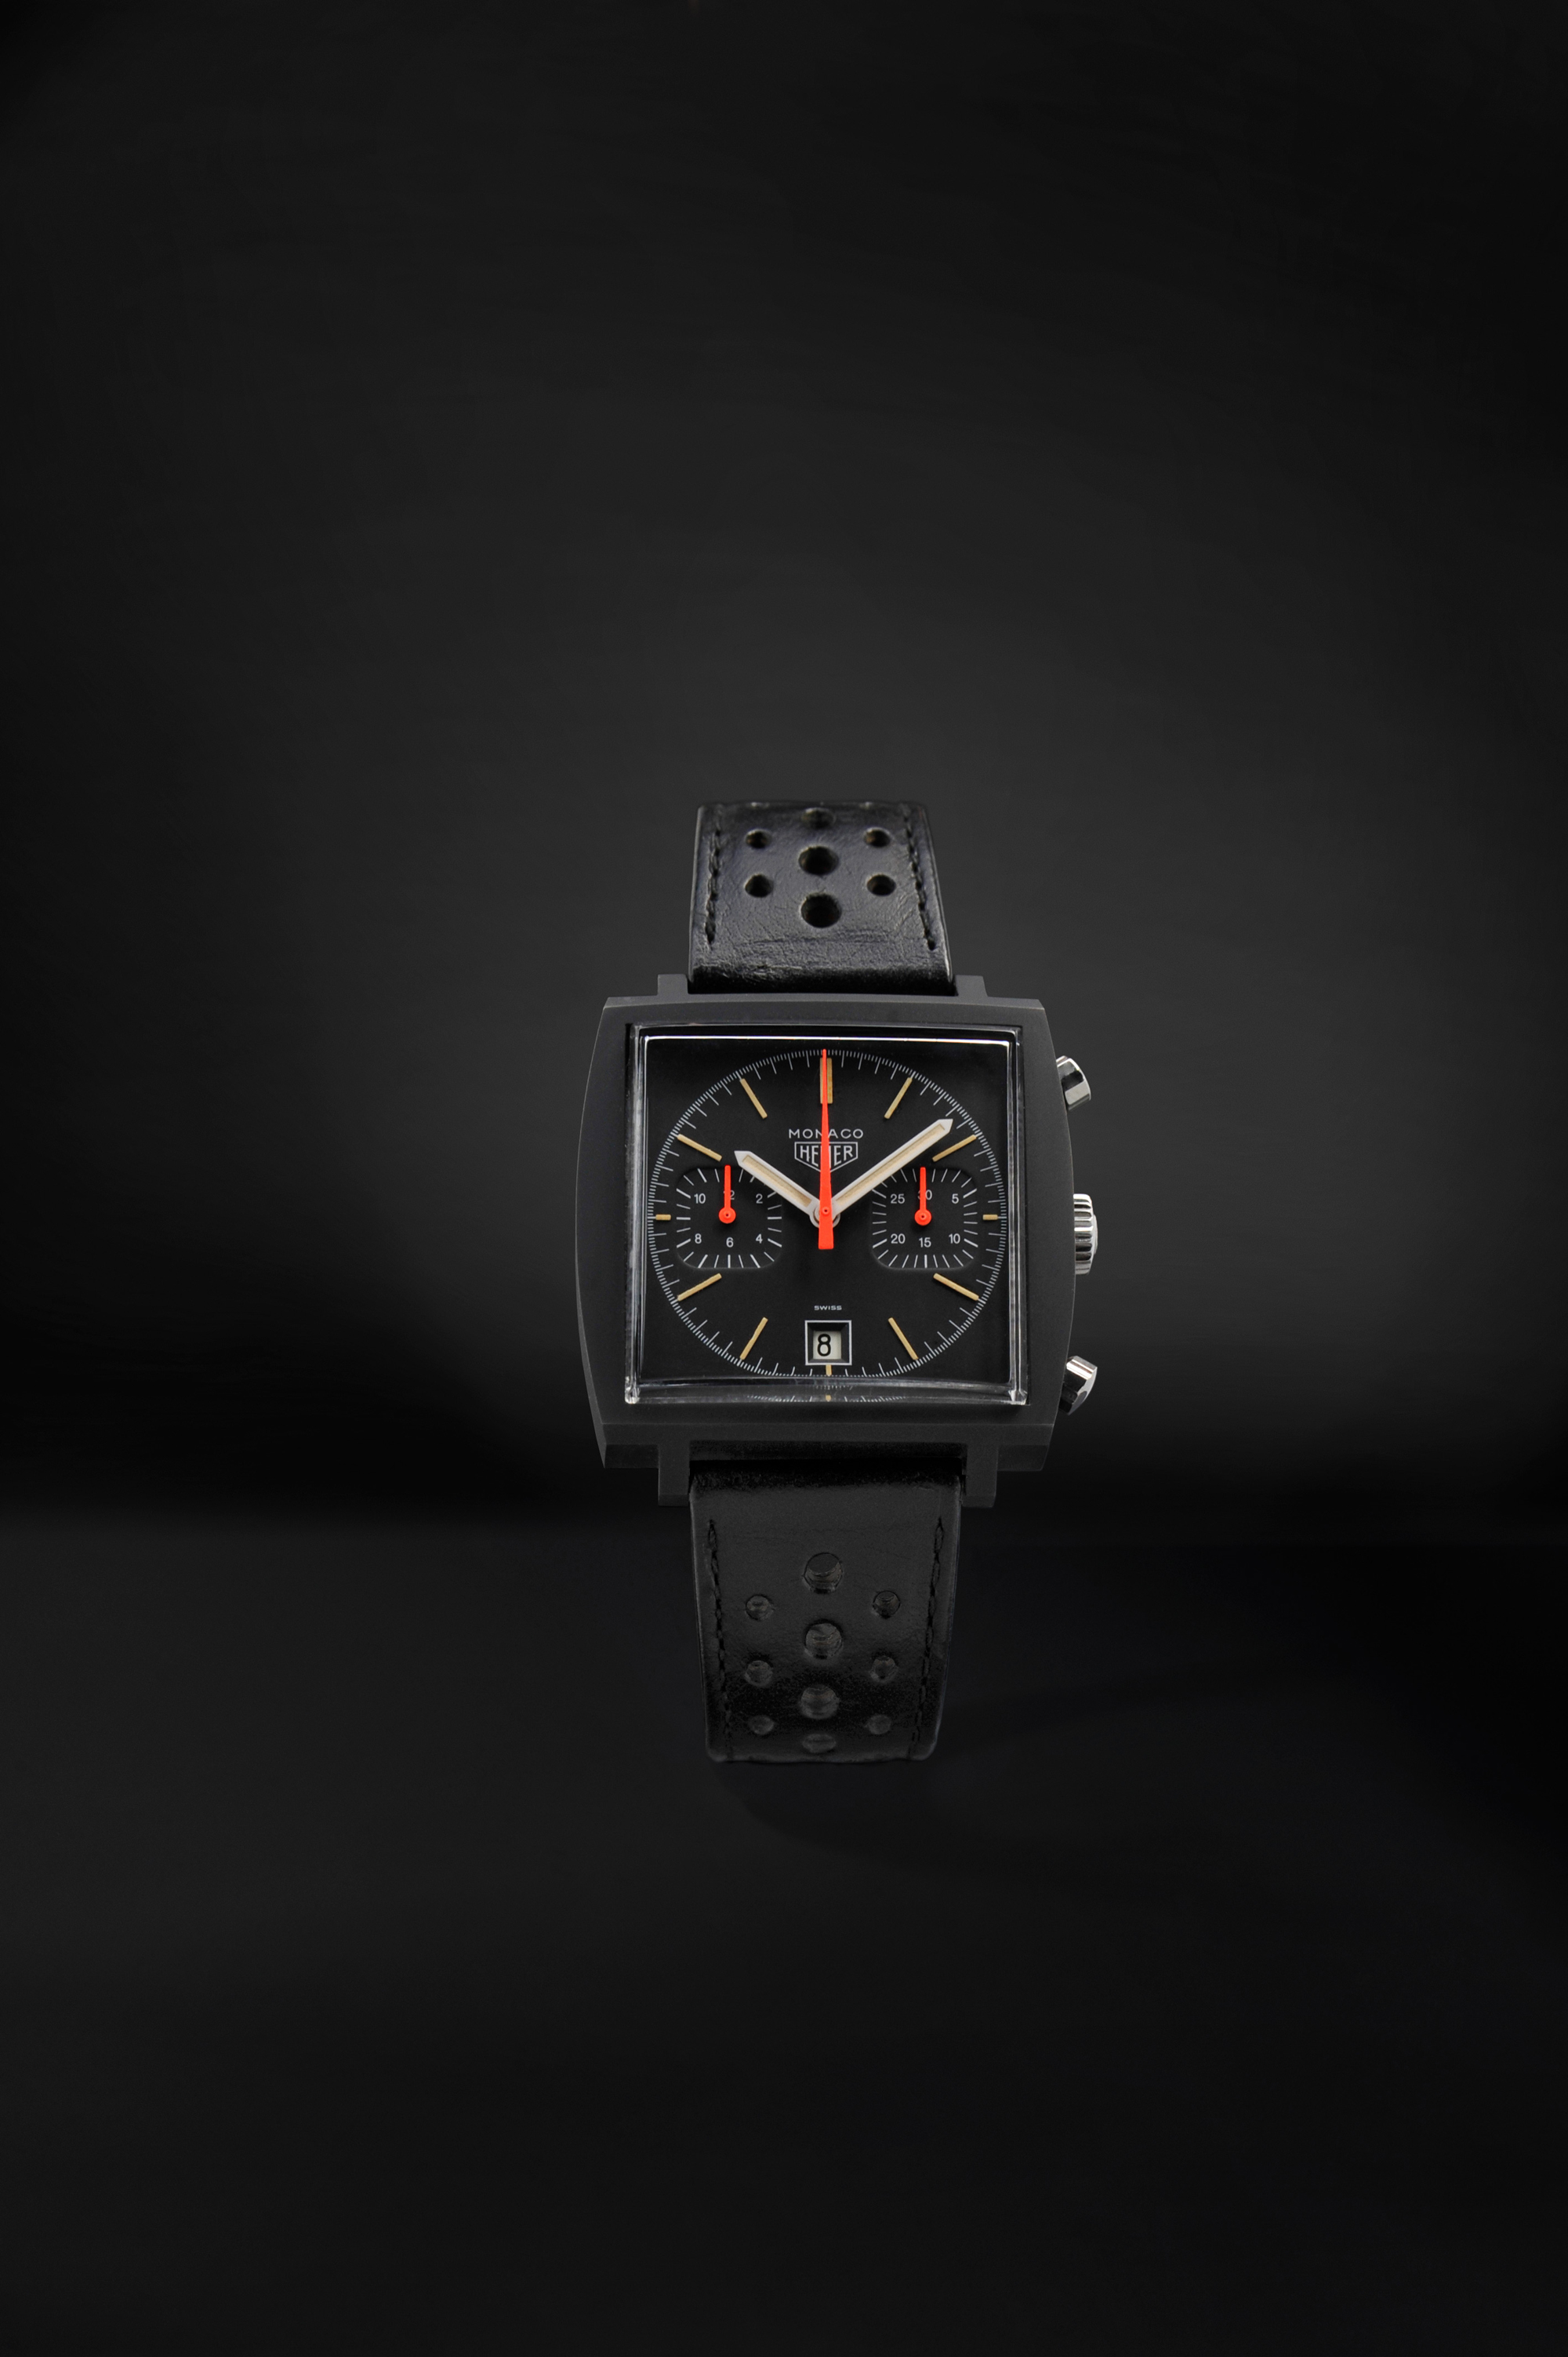 The Monaco received a makeover. Coined as The Dark Lord, the all black chronograph was cloaked in a black anodised case and is one of the most coveted pieces even today. 